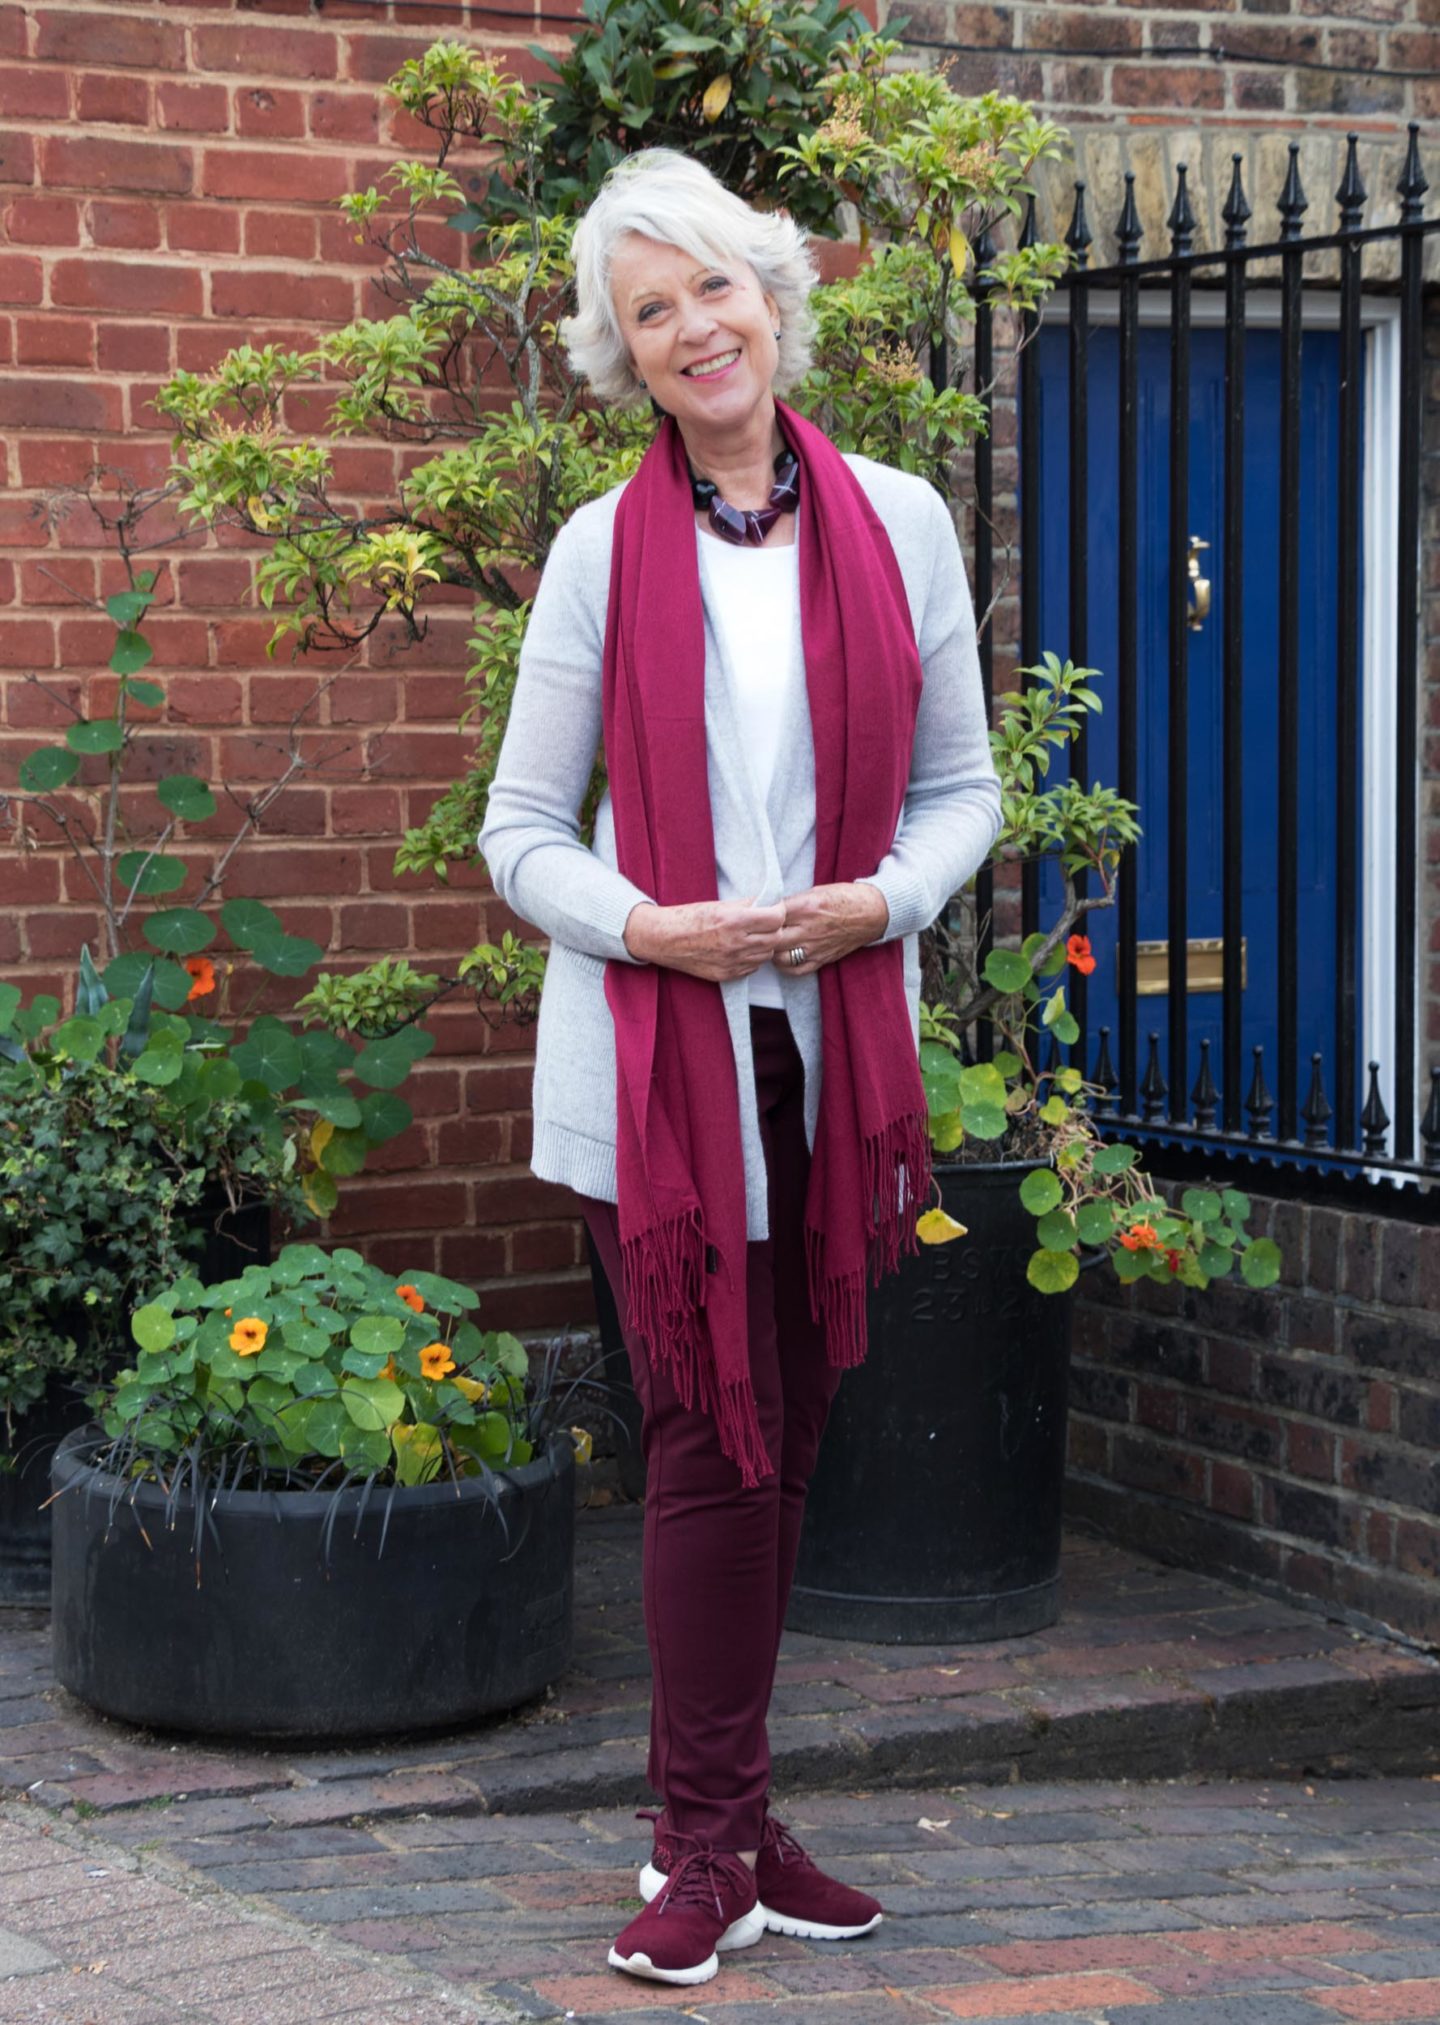 The versatile cardigan - Chic at any age